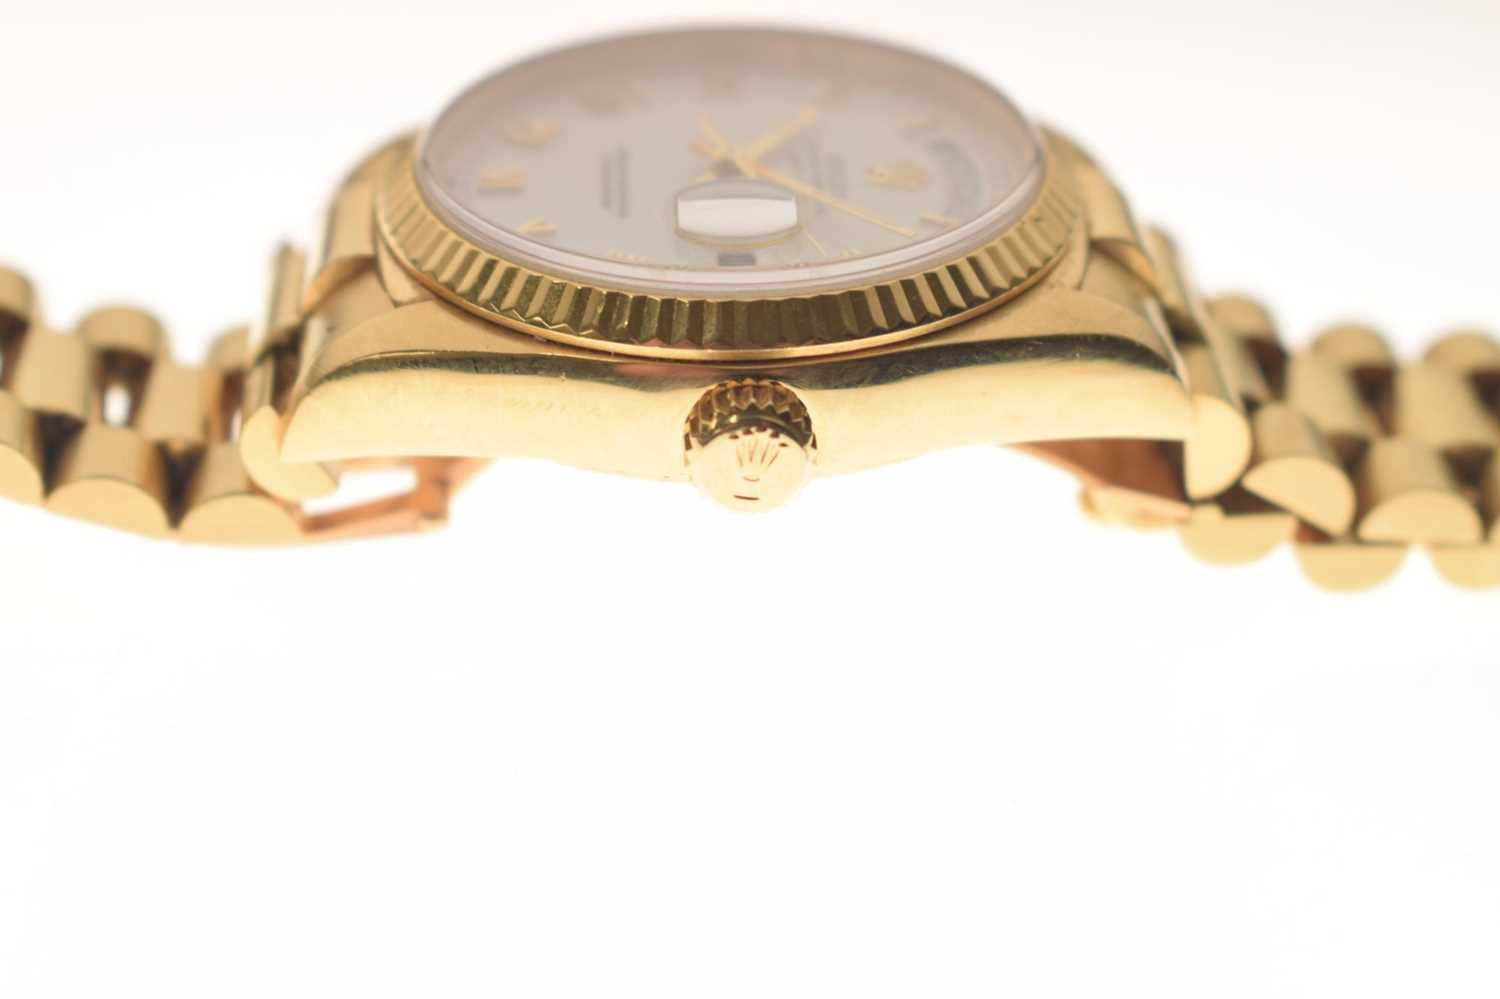 Rolex - Gentleman's 18ct gold Oyster Perpetual Day Date wristwatch - Image 4 of 16